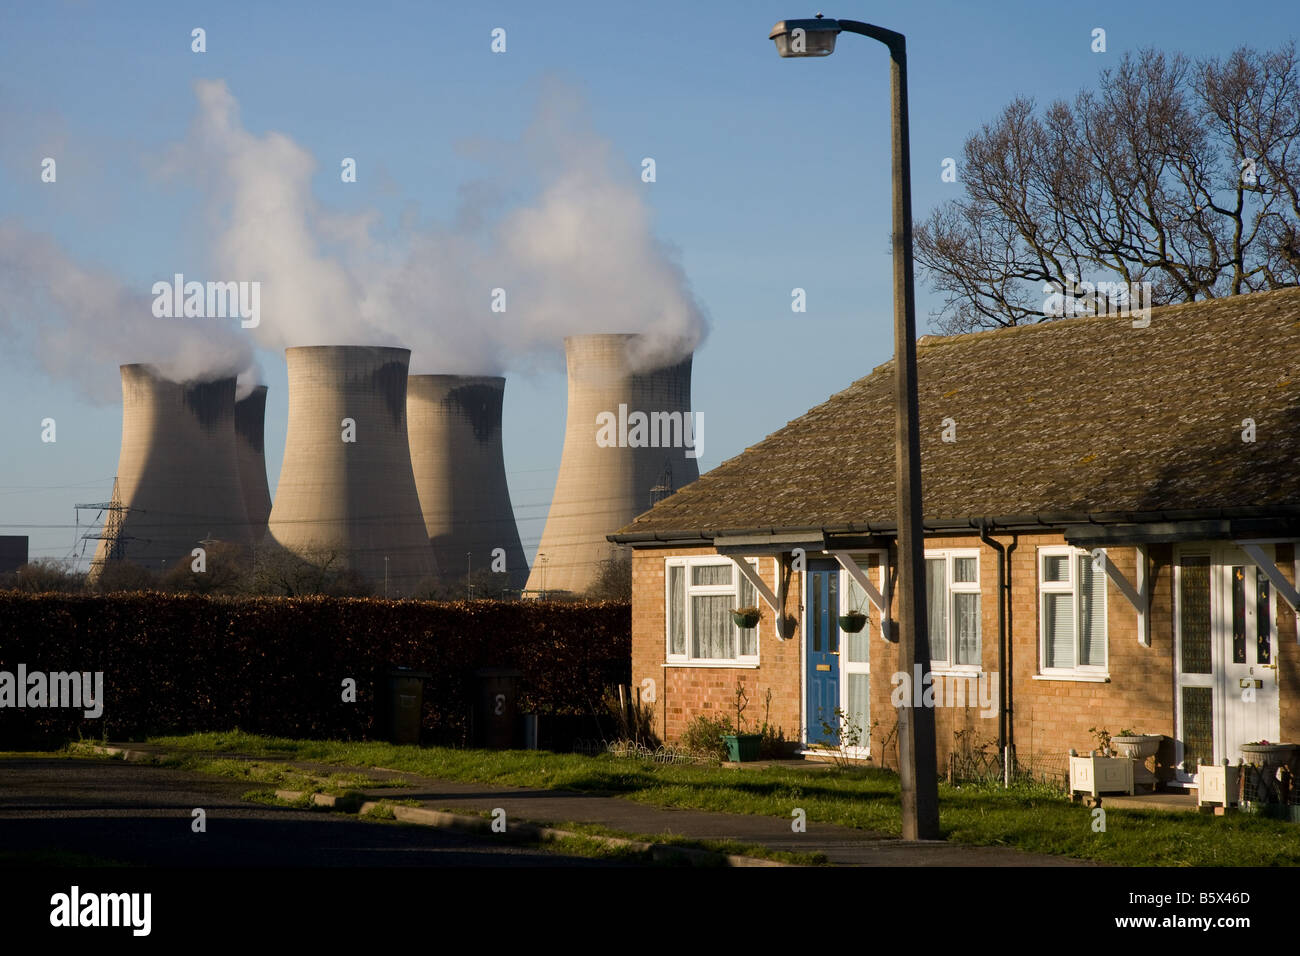 Drax Power Station - bungalows in urban housing estate overshadowed by high cooling towers - Selby, West Yorkshire, England, UK. Stock Photo